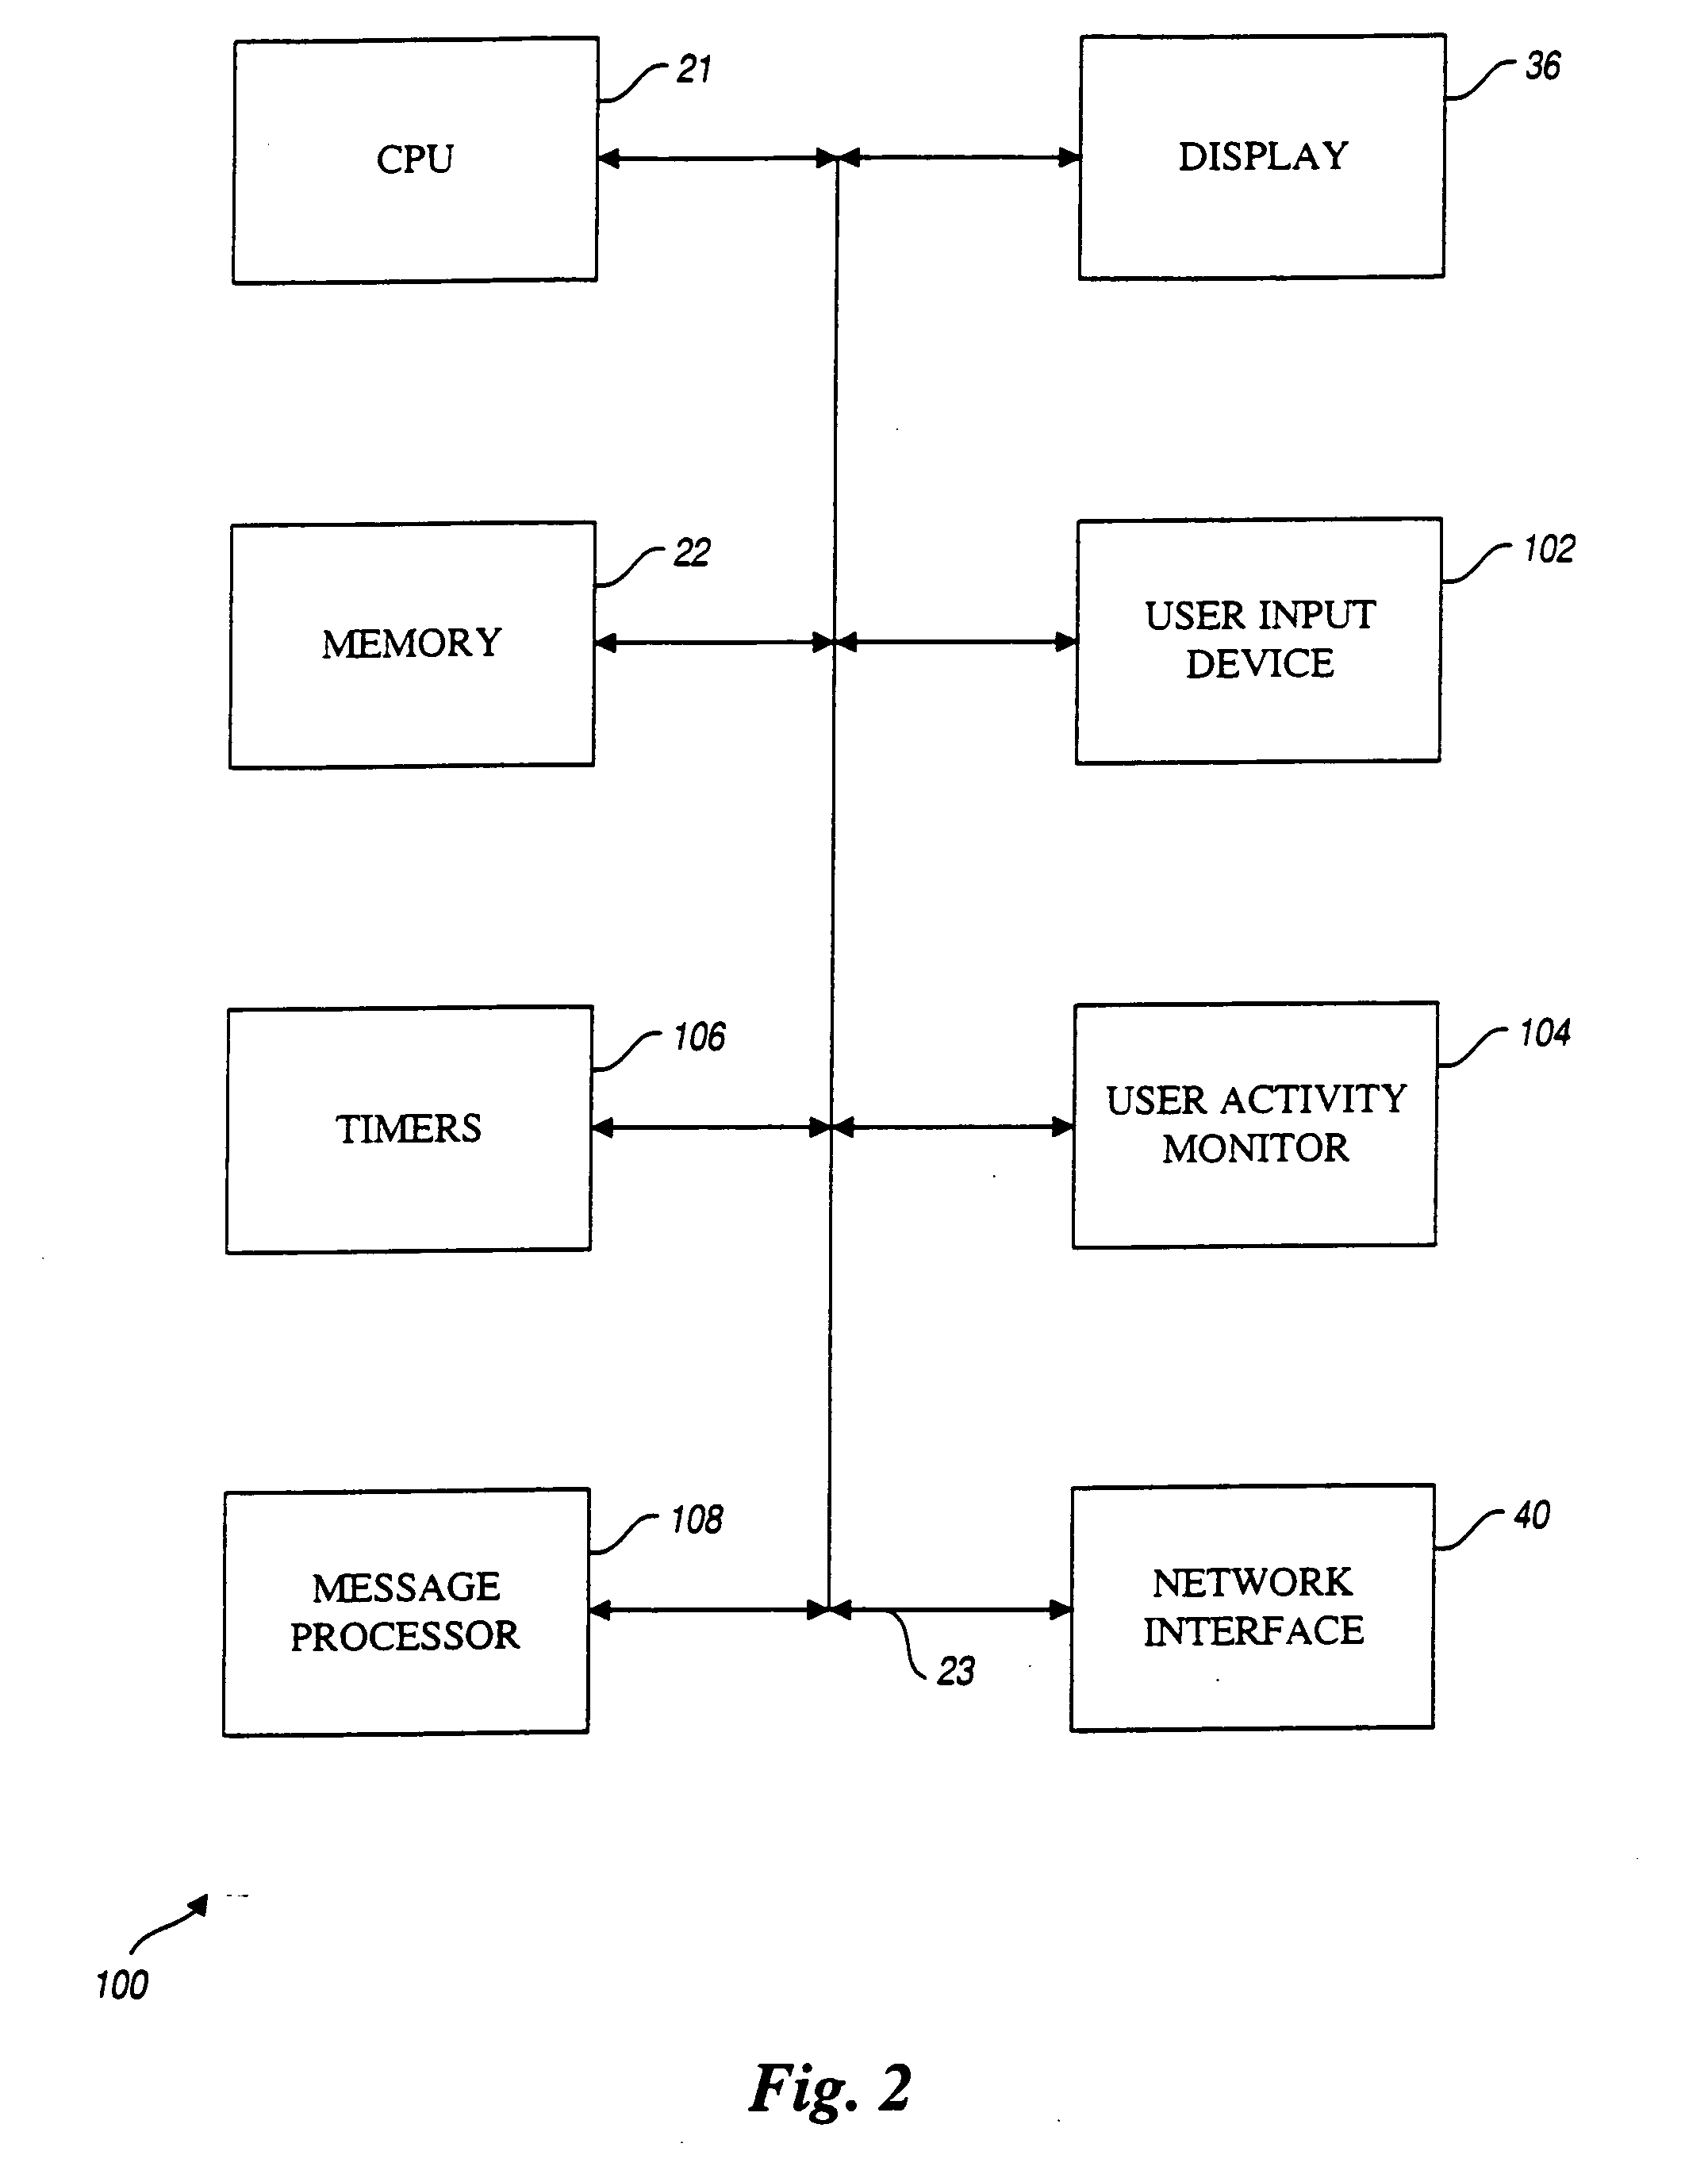 System and method for activity monitoring and reporting in a computer network